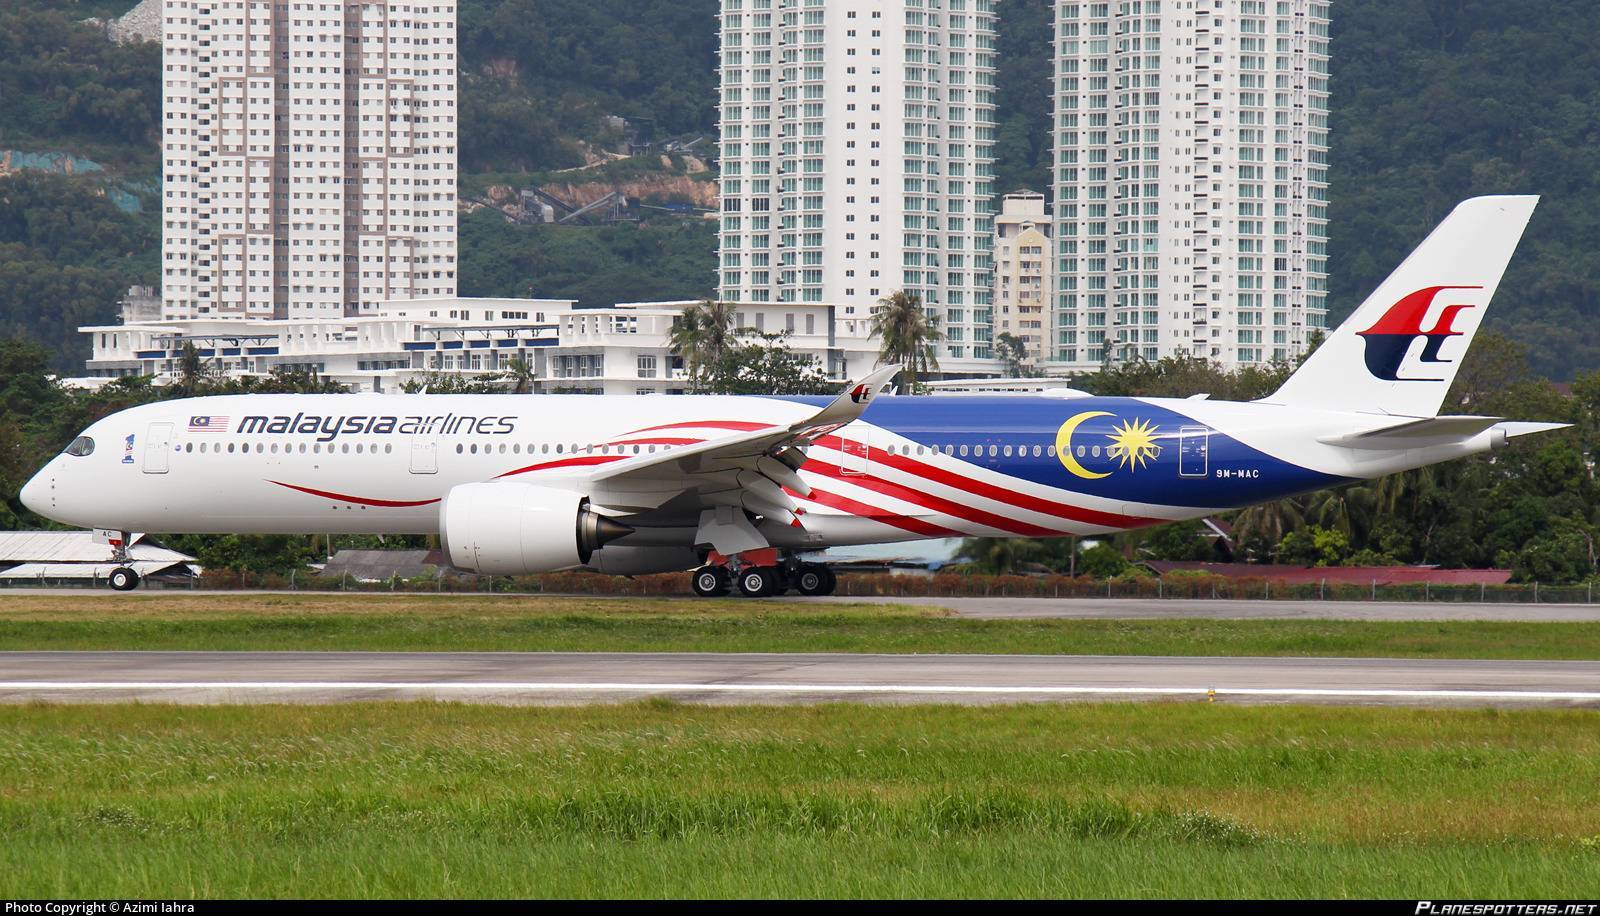 Флот malaysia airlines - malaysia airlines fleet